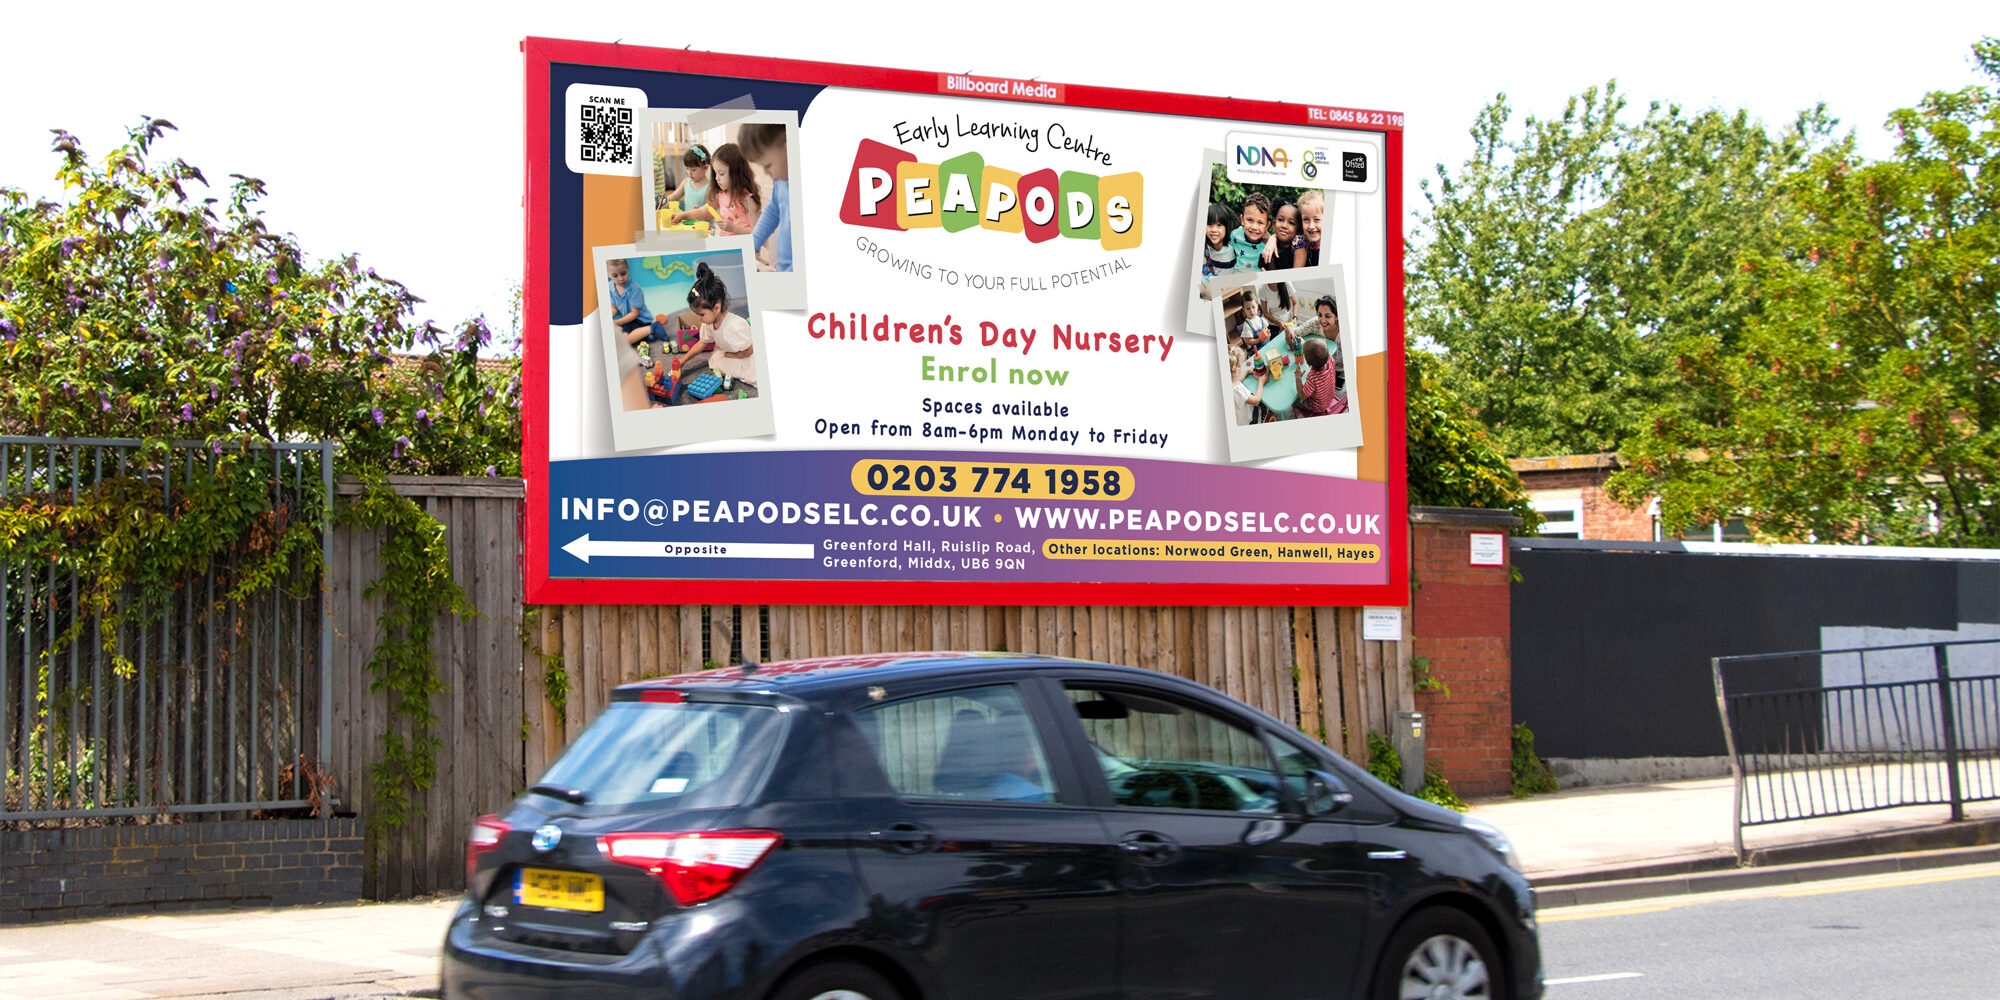 Billboard containing a campaign for a Nursery called Peapods. This Nursery is an Early Years Provider. tHe purpose is to advertise the nursery,